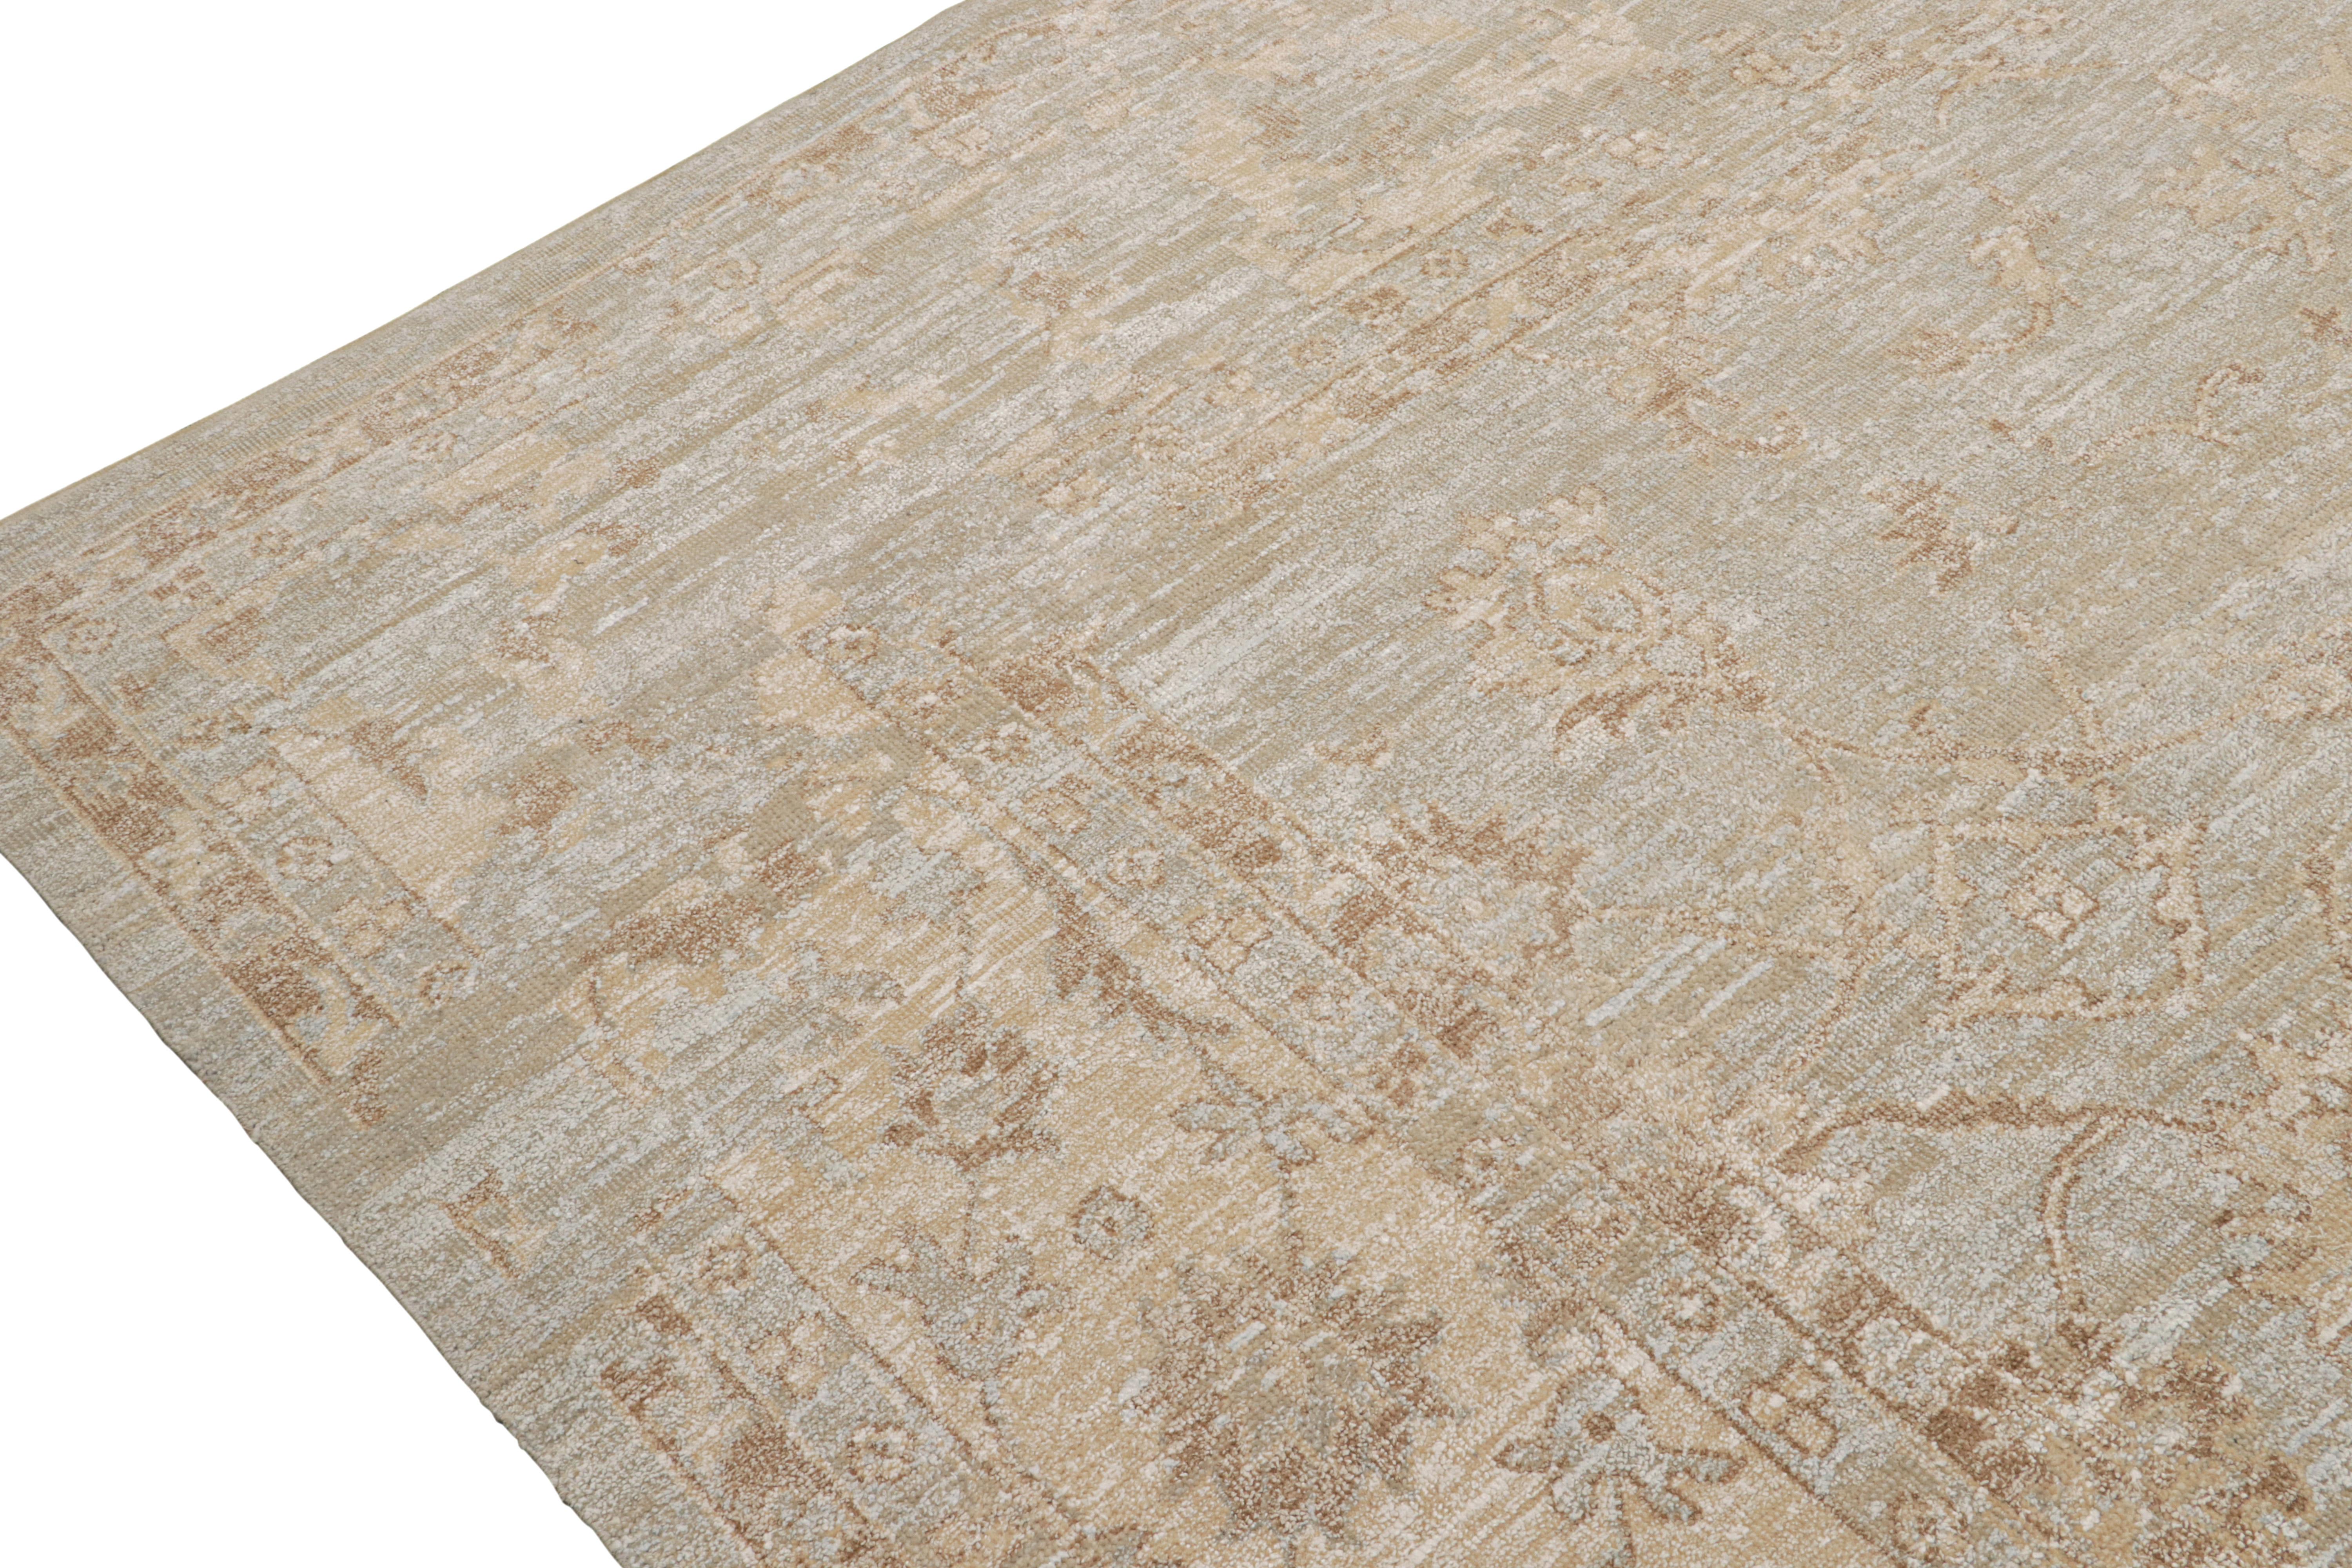 Rug & Kilim’s Oushak Style Rug in Beige-Brown & White Geometric Patterns In New Condition For Sale In Long Island City, NY